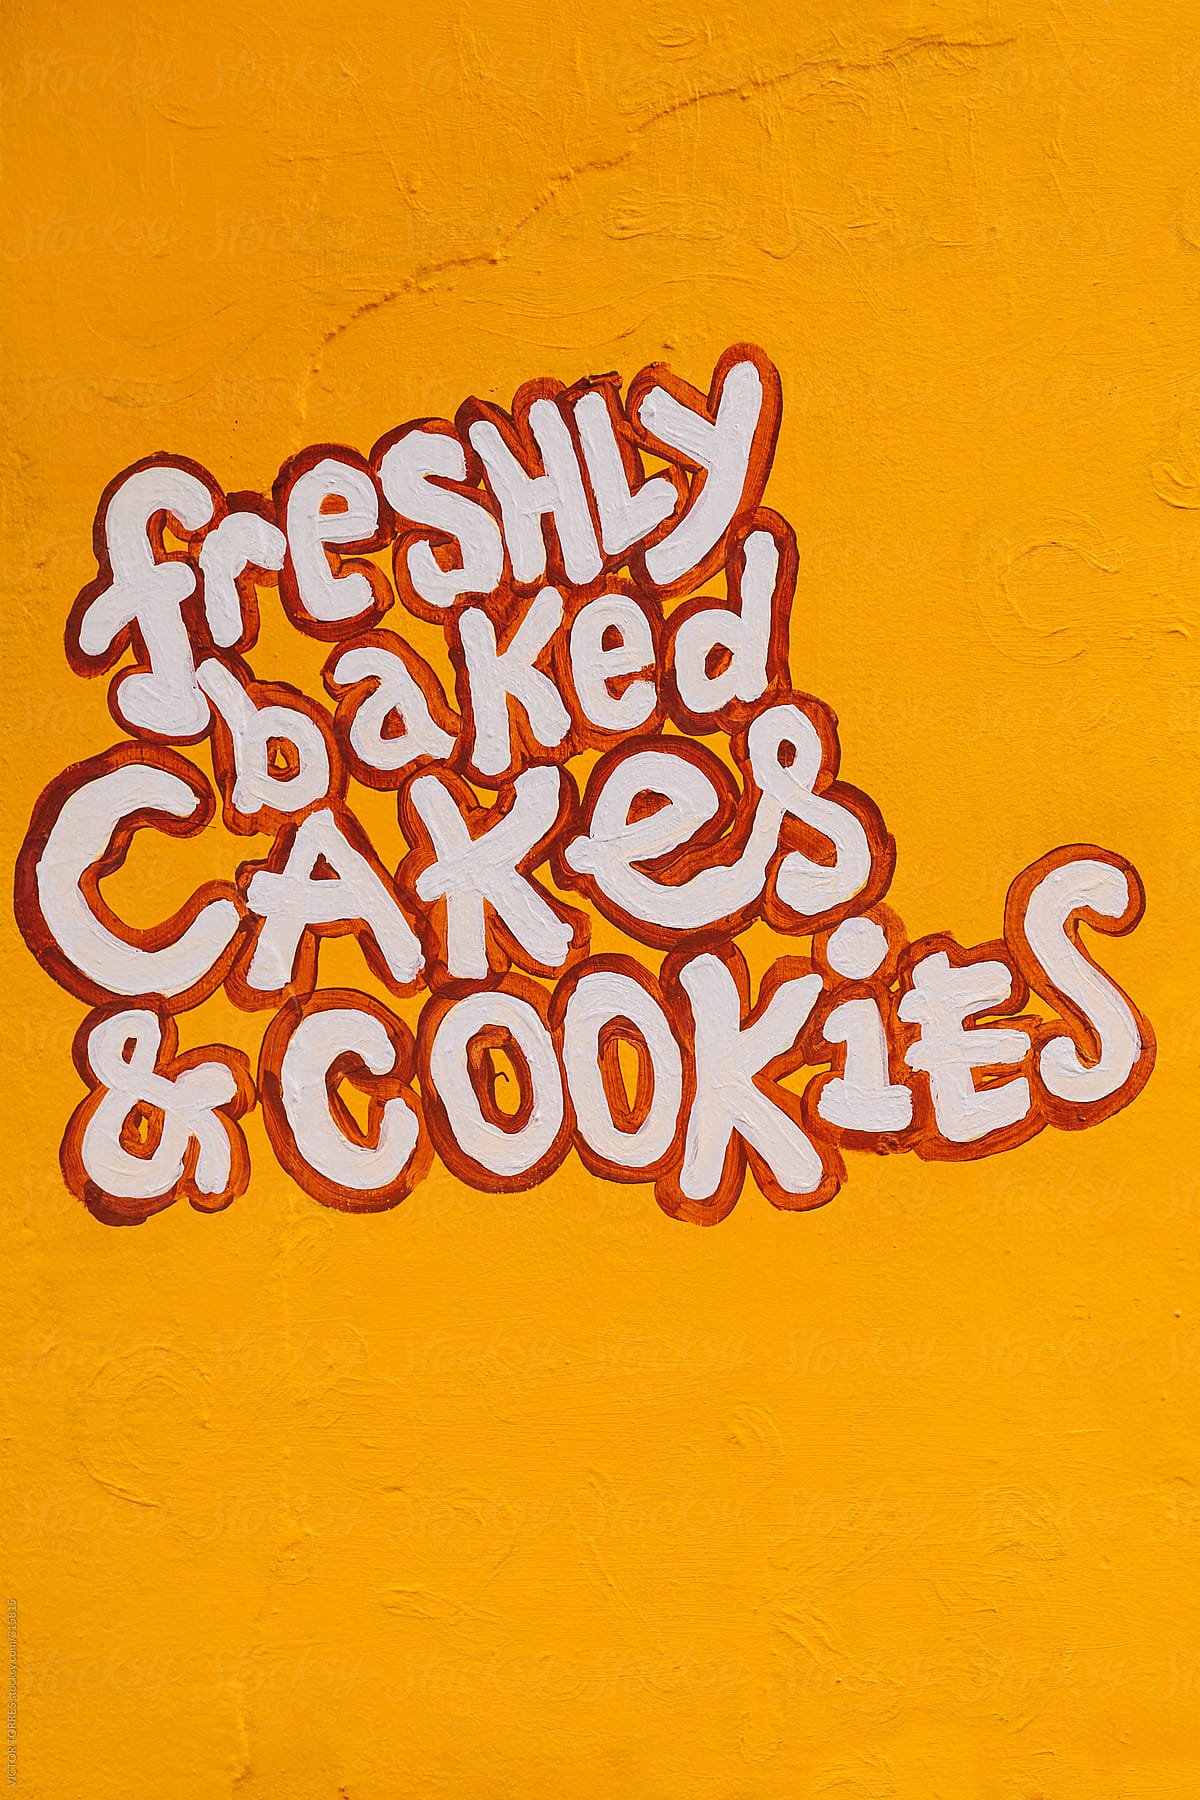 Hand paint Lettering of a Cake Shop